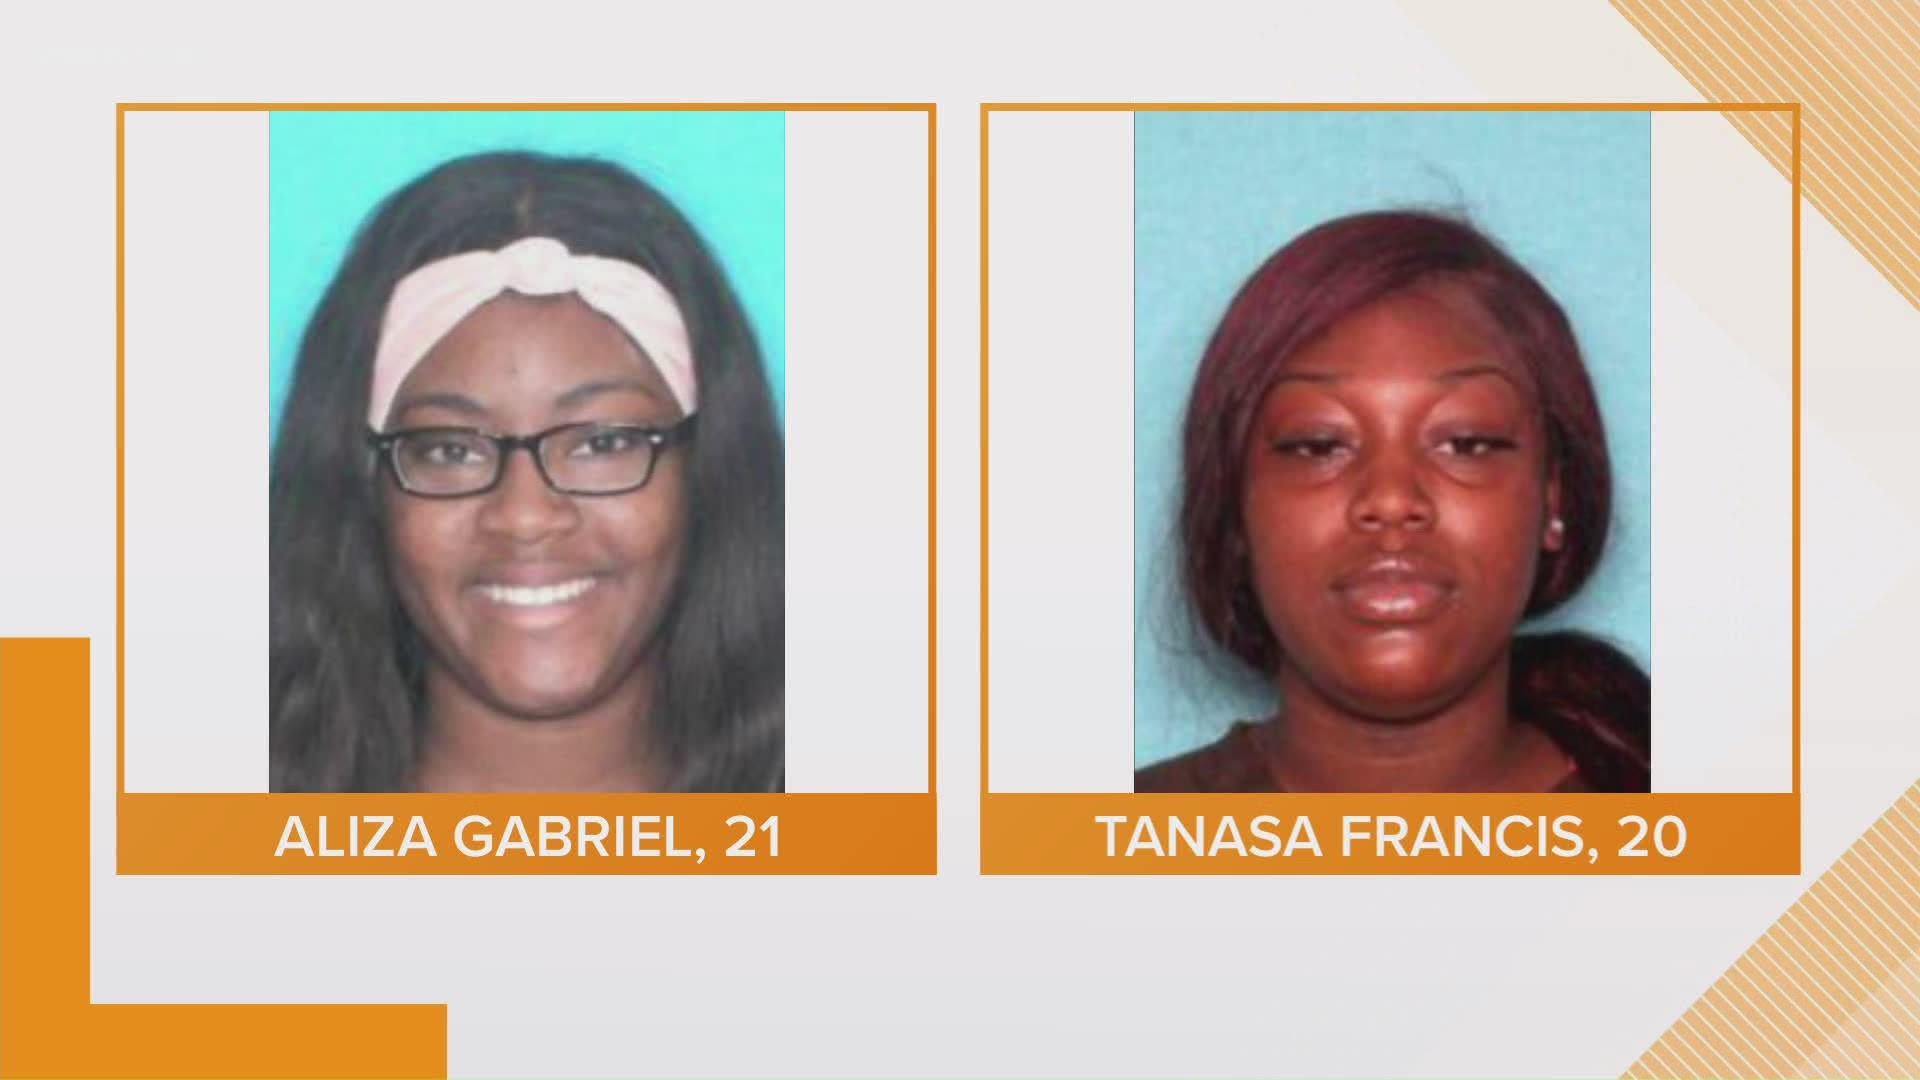 The shooting took the lives of 21-year-old Aliza Gabriel and 20-year-old Tanasa Francis. Deputies say they were attending a party when the suspect opened fire.